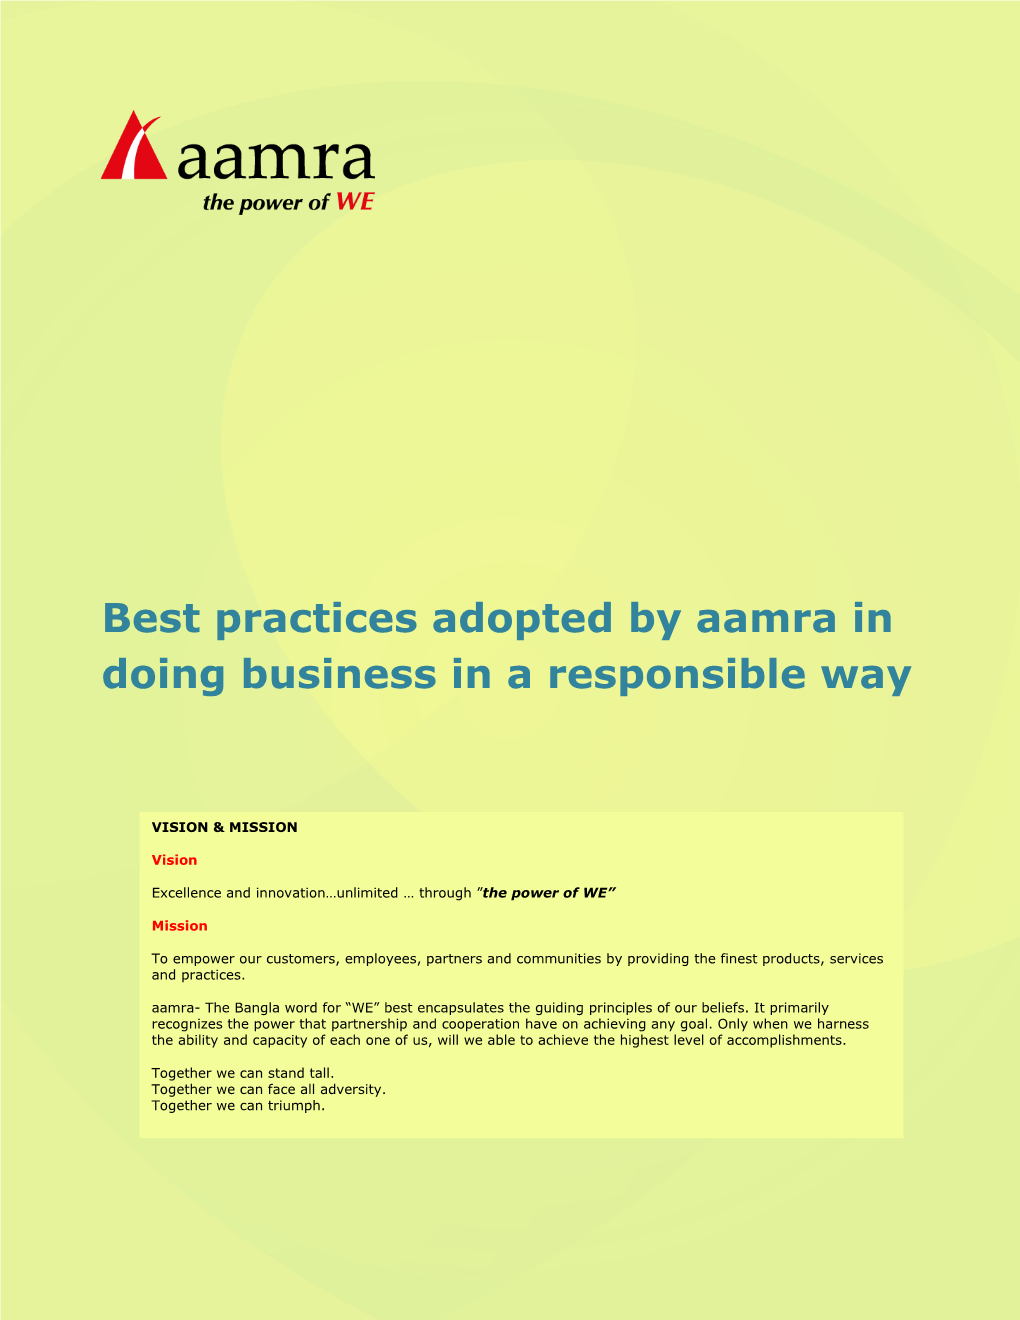 Best Practices Adopted by Aamra in Doing Business in a Responsible Way